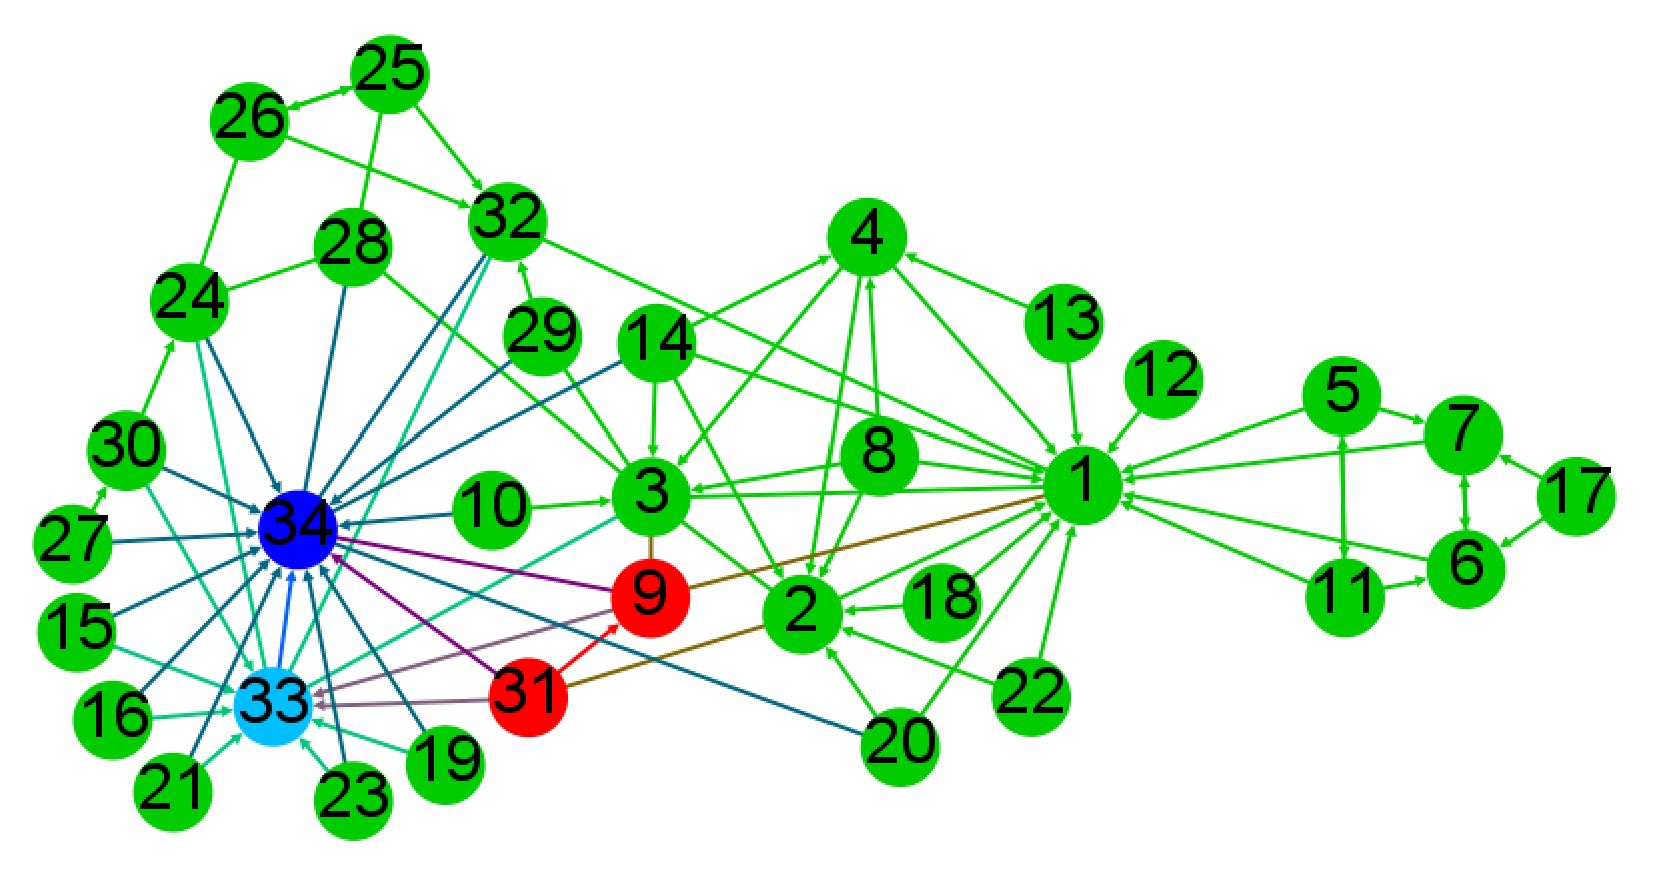 Zone generated by nodes 9 or 31